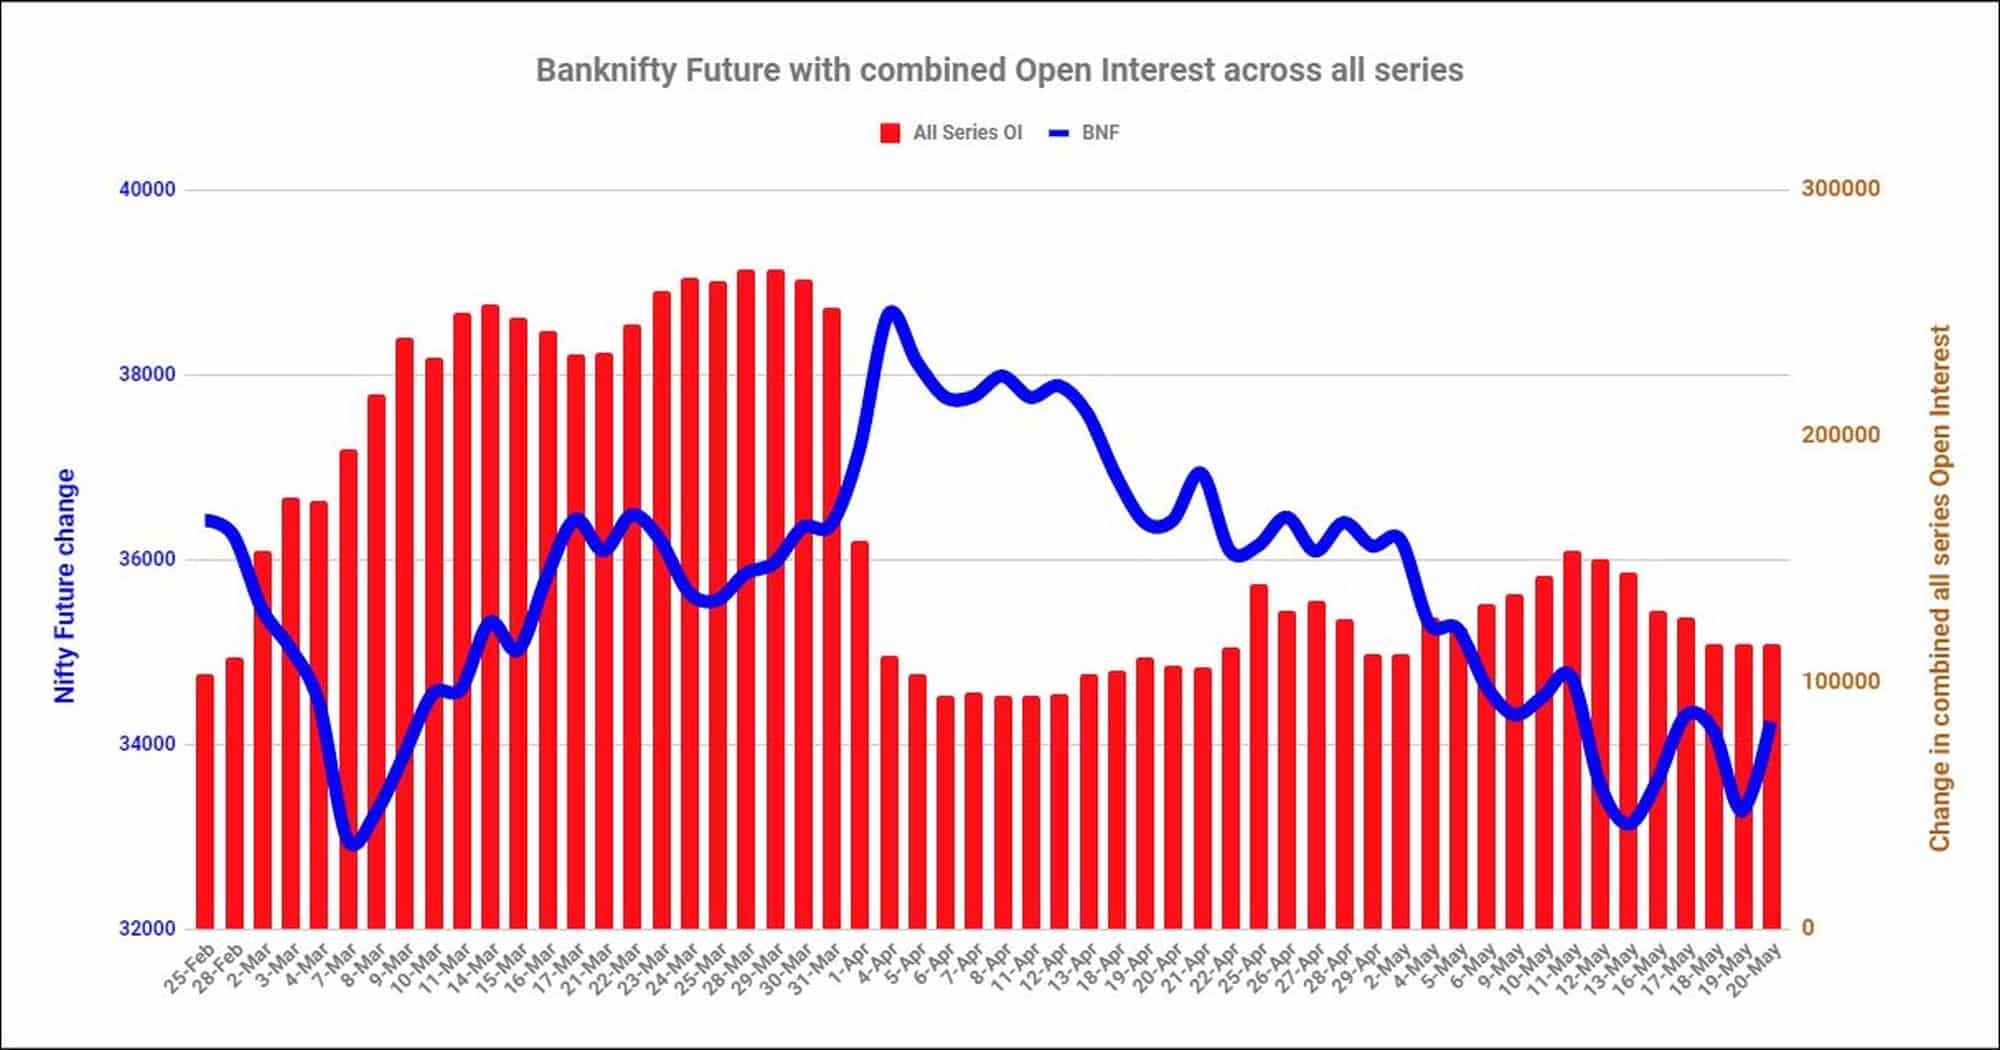 Bnf20May Nifty And Banknifty Futures With All Series Combined Open Interest – 20Th May 2022 Banknifty, Nifty, Open Interest